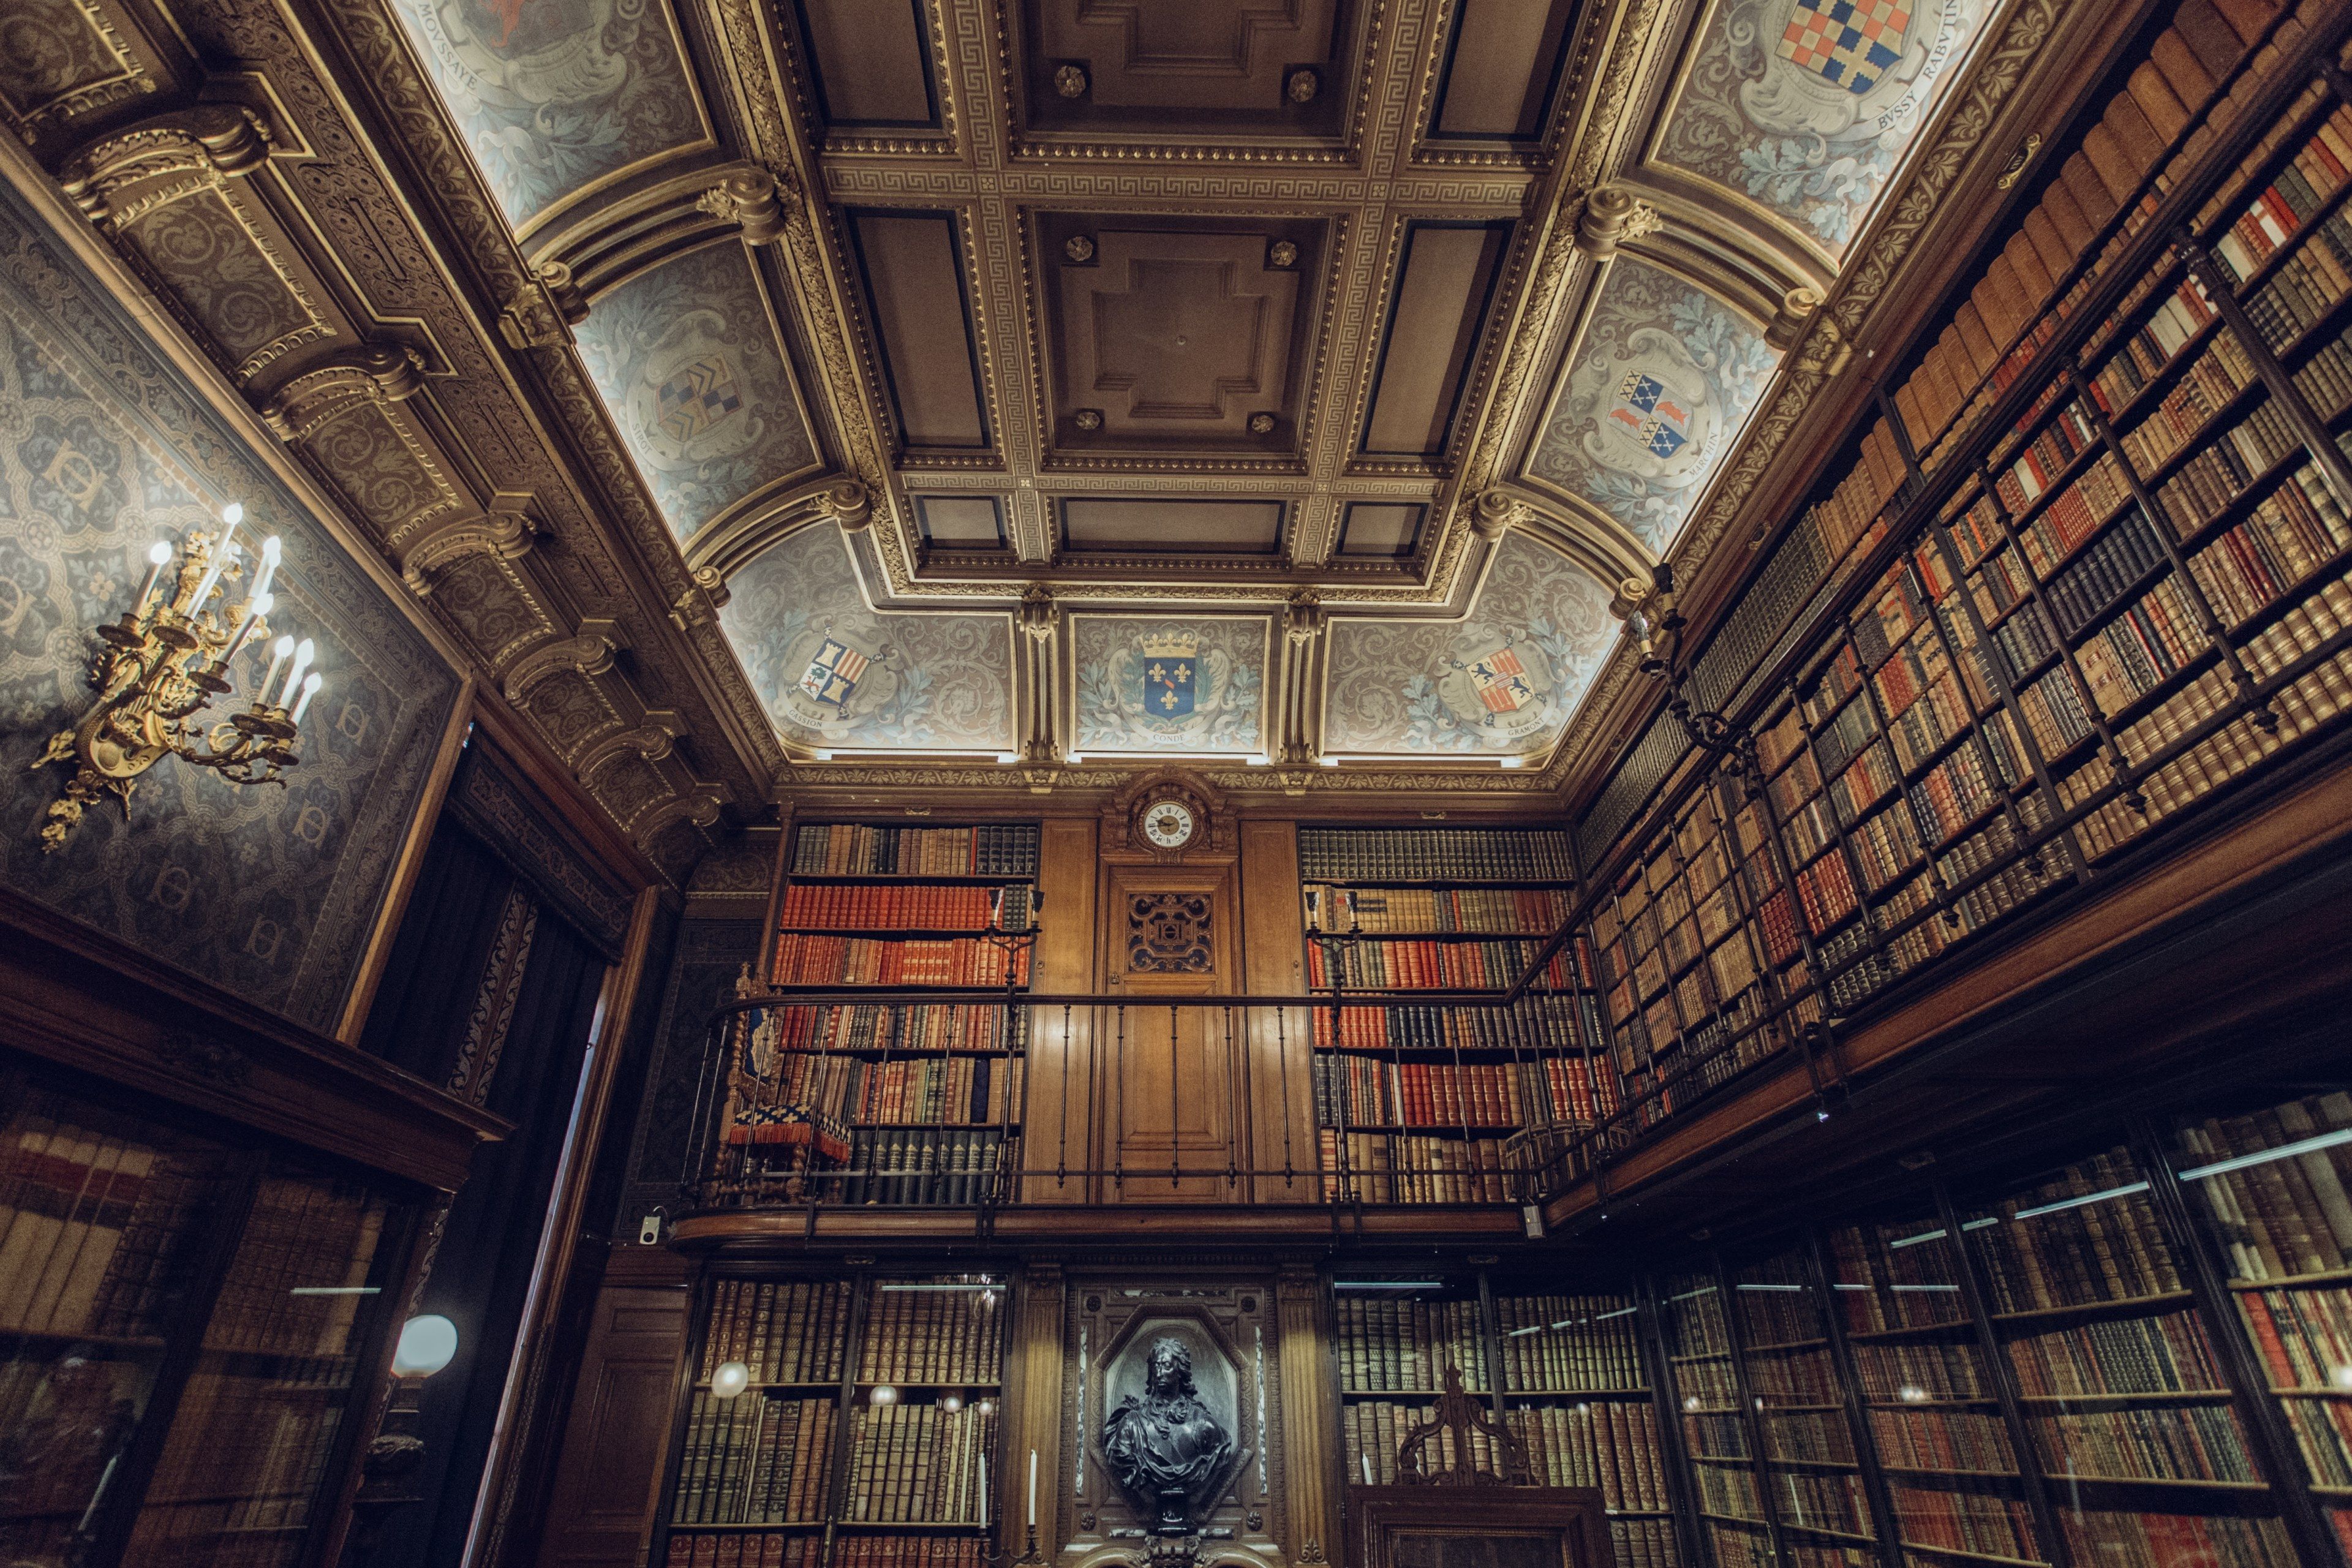  Bibliothek Hintergrundbild 3840x2560. Wallpaper / a large library or study filled with lots of books ornate ceilings and two levels in chantilly, chantilly library study 4k wallpaper free download